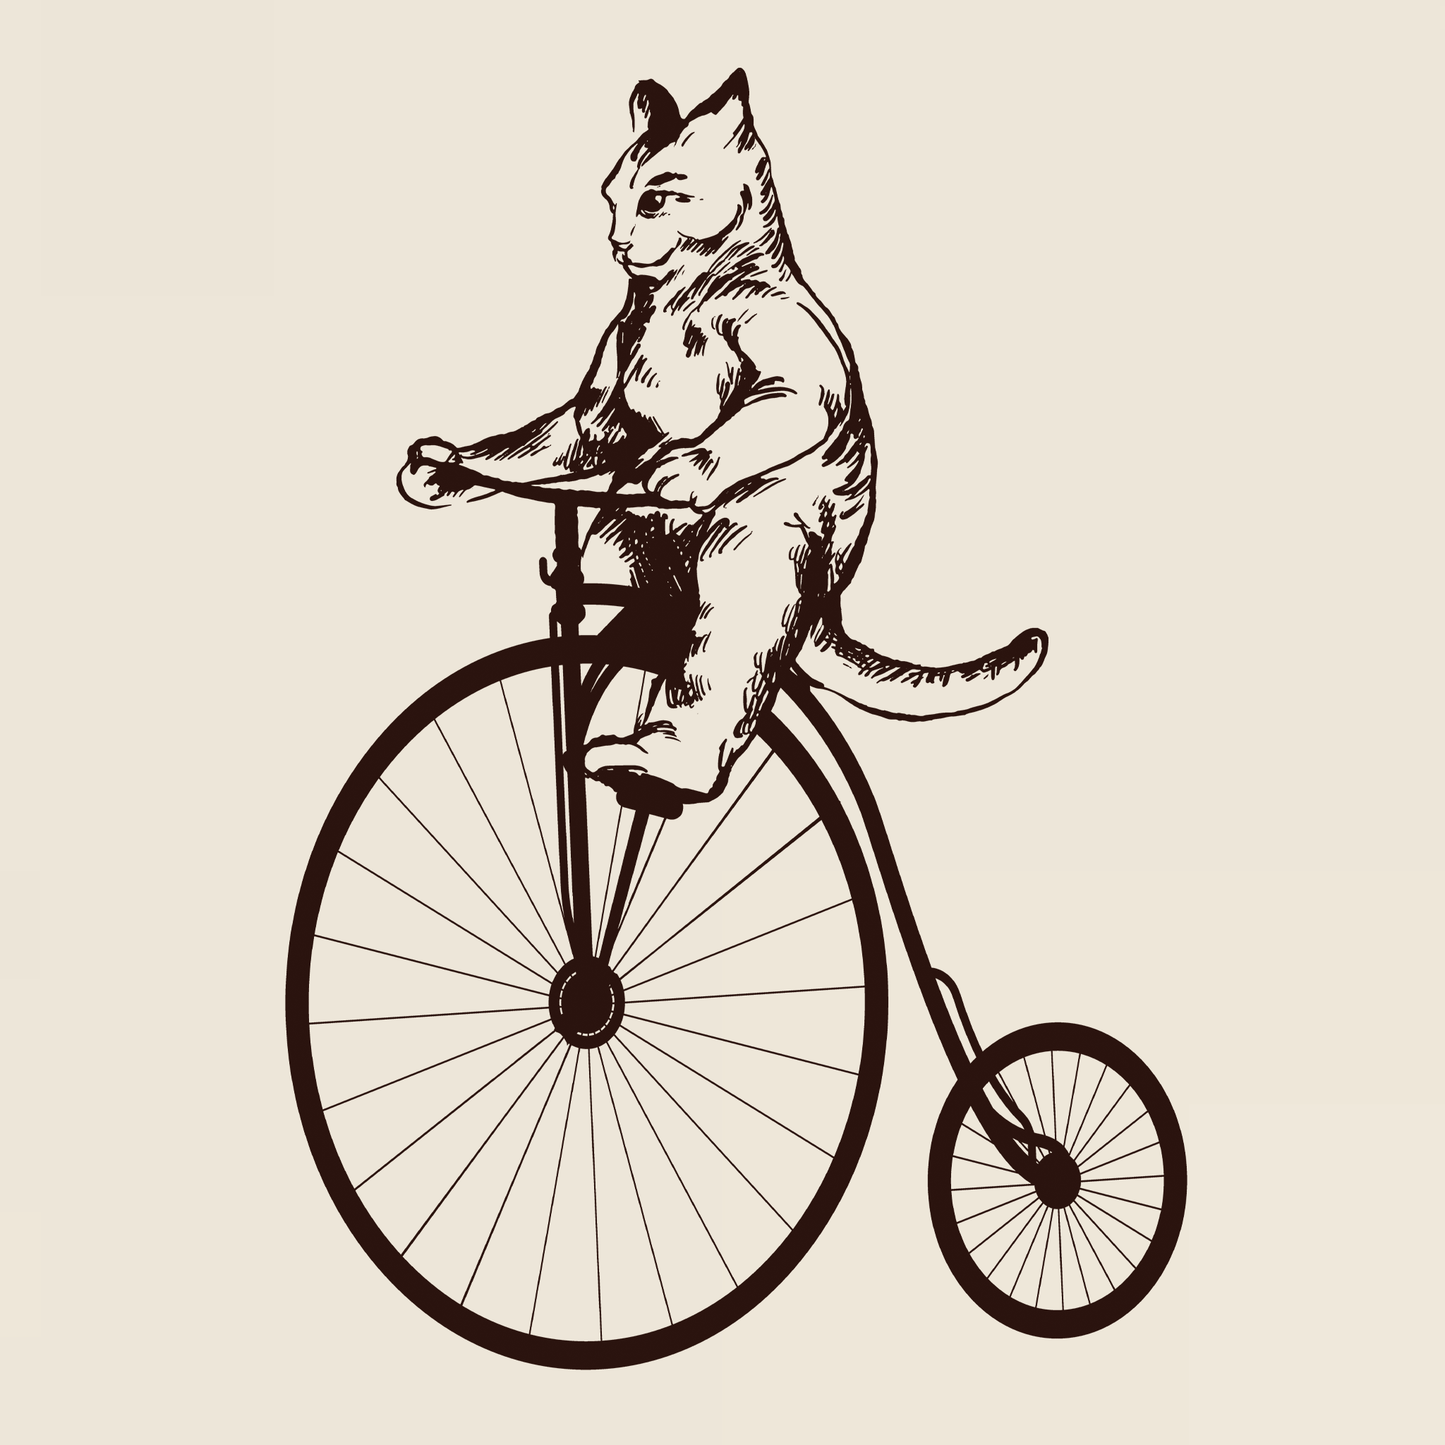 Cat On A High Wheel Bicycle T-Shirt